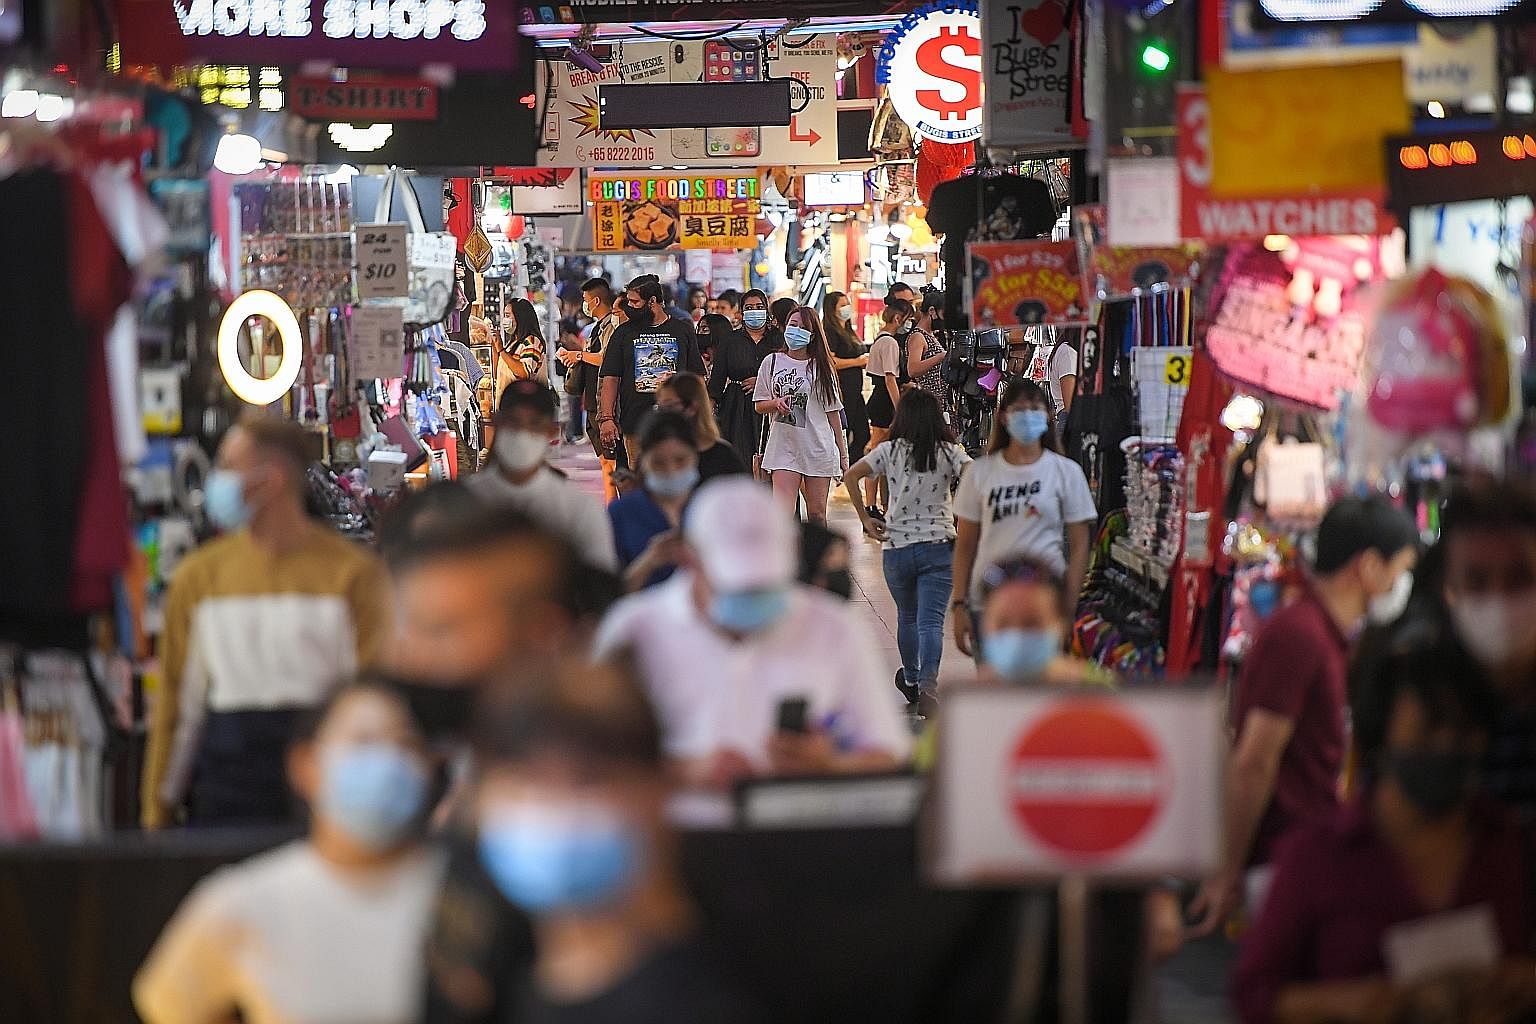 The bustle in Bugis Street on Monday, with the masks on people's faces the only giveaway that Singapore is still battling a pandemic. The currently low infection numbers here and the greater freedom to move around are a reward for everyone working to